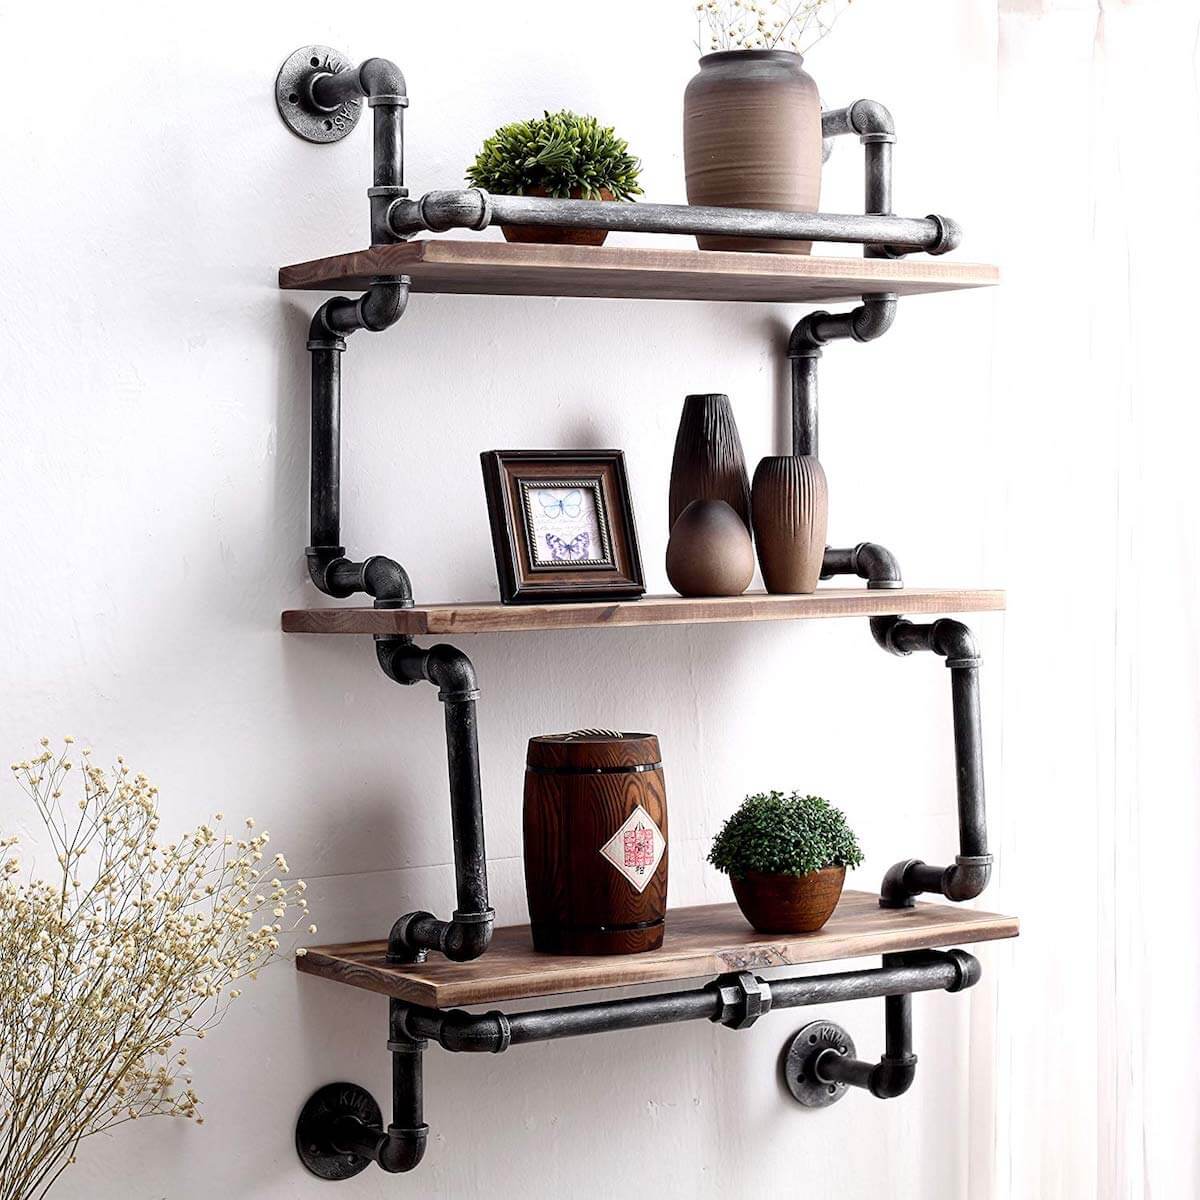 25 Pipe Shelves To Add Rustic Flair To Your Home • Insteading